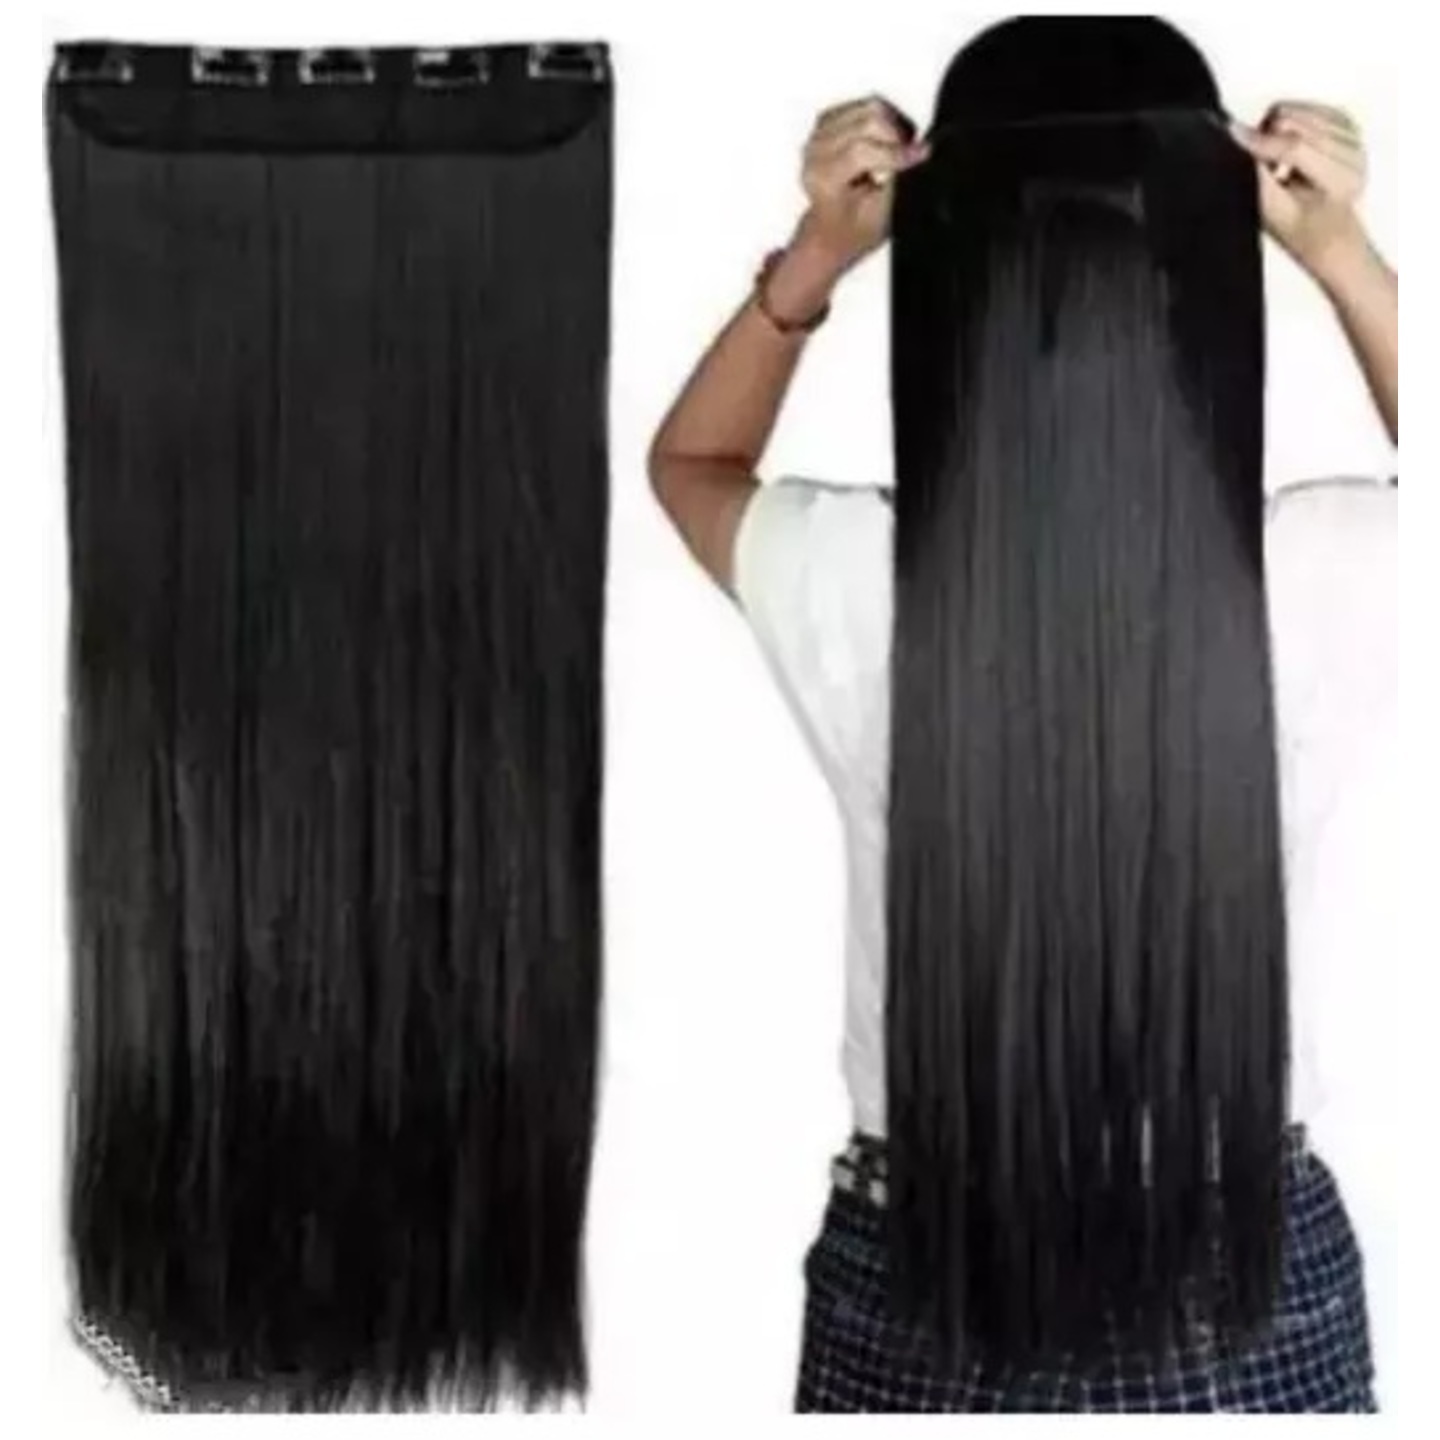 26 Inches 5 Clip base black Straight hair extension for women